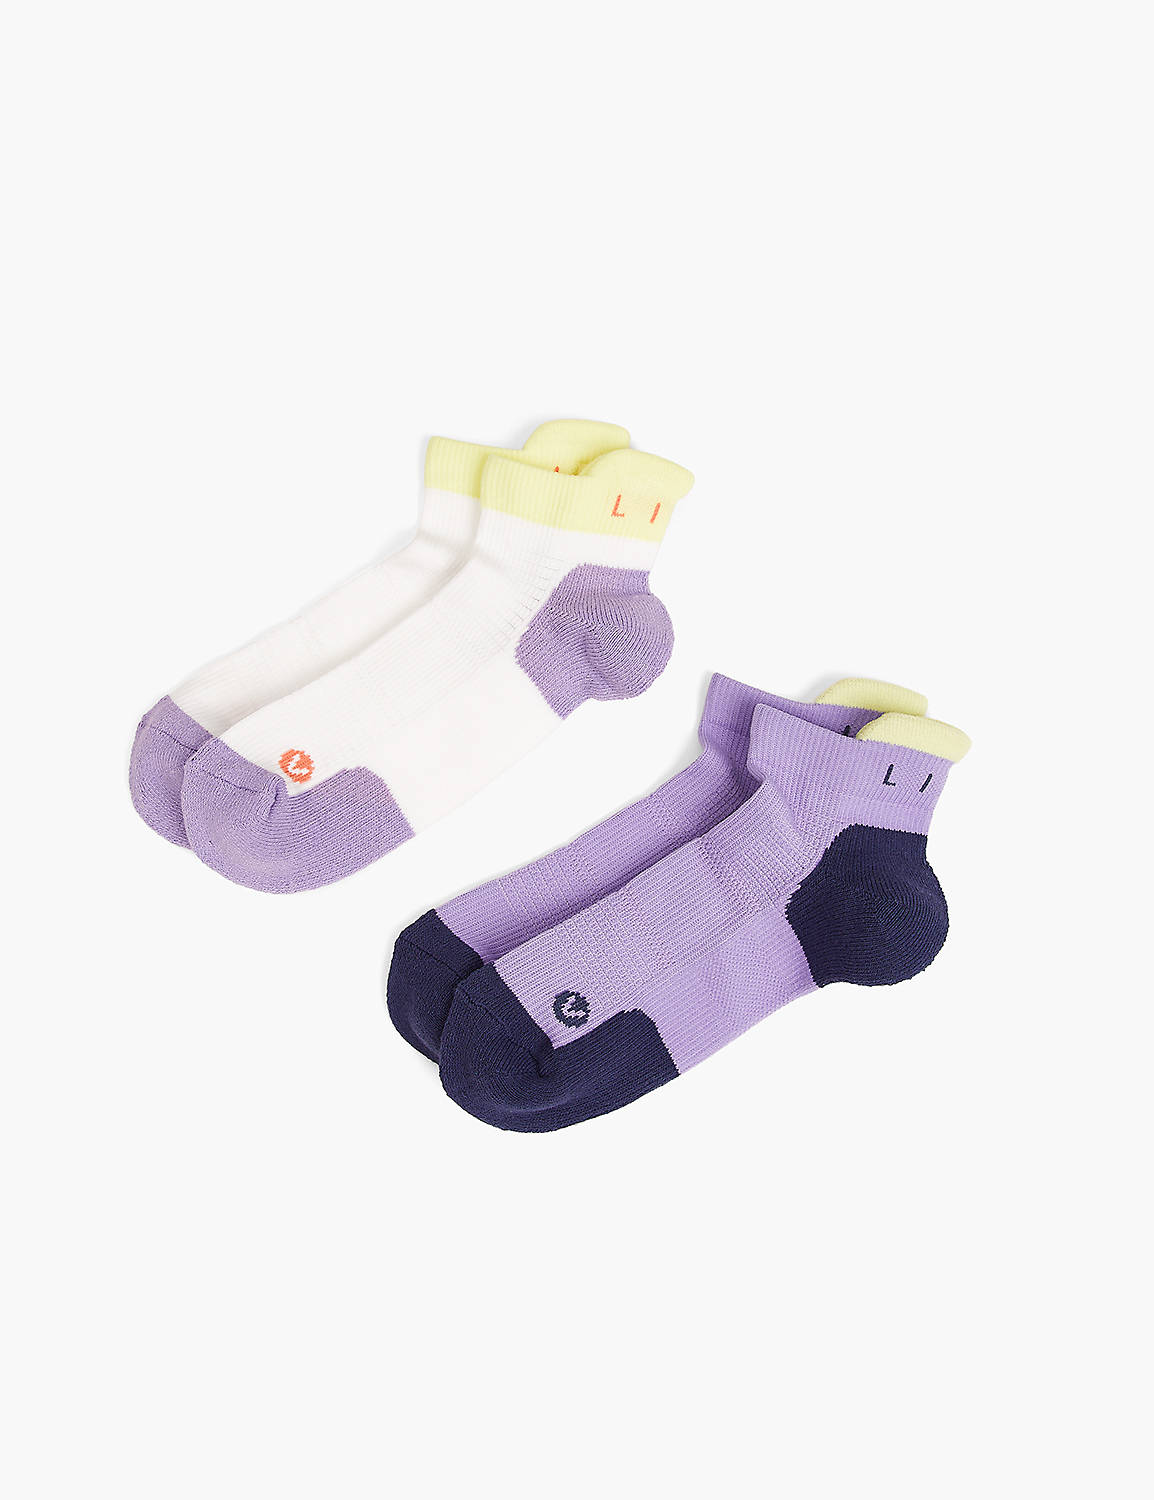 Livi 2 Pack Ankle Sock Product Image 1